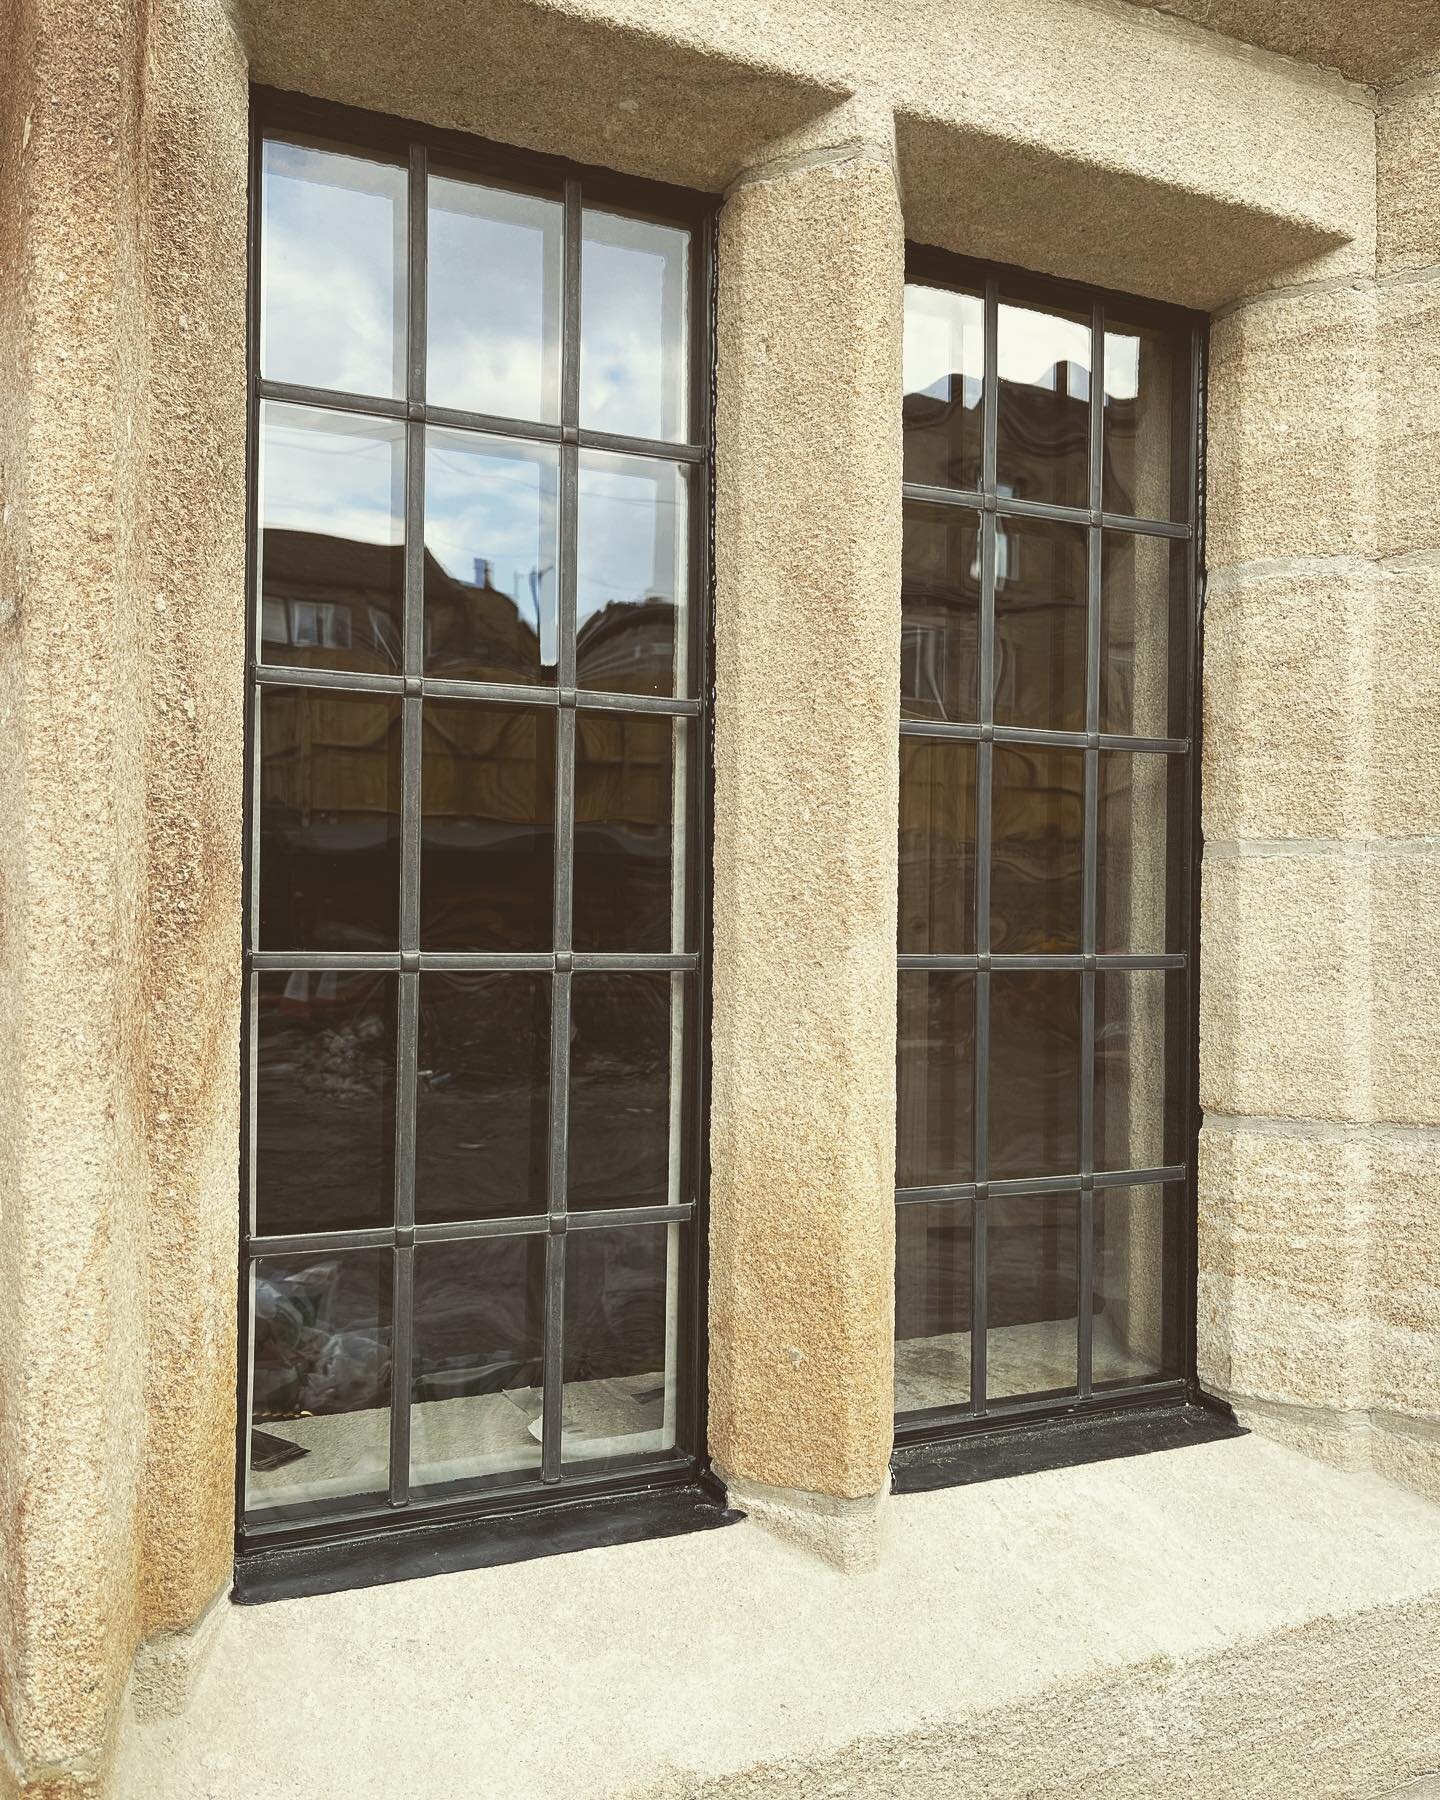 New faceted &lsquo;Insulead&rsquo; glazing for a  client in our hometown, Brighouse - West Yorkshire📍
#westyorkshire #glazing #windows #glazingsystem #historic #stonemullions #conservation #listed #newwindows #lead #squarelead #heritage #architectur